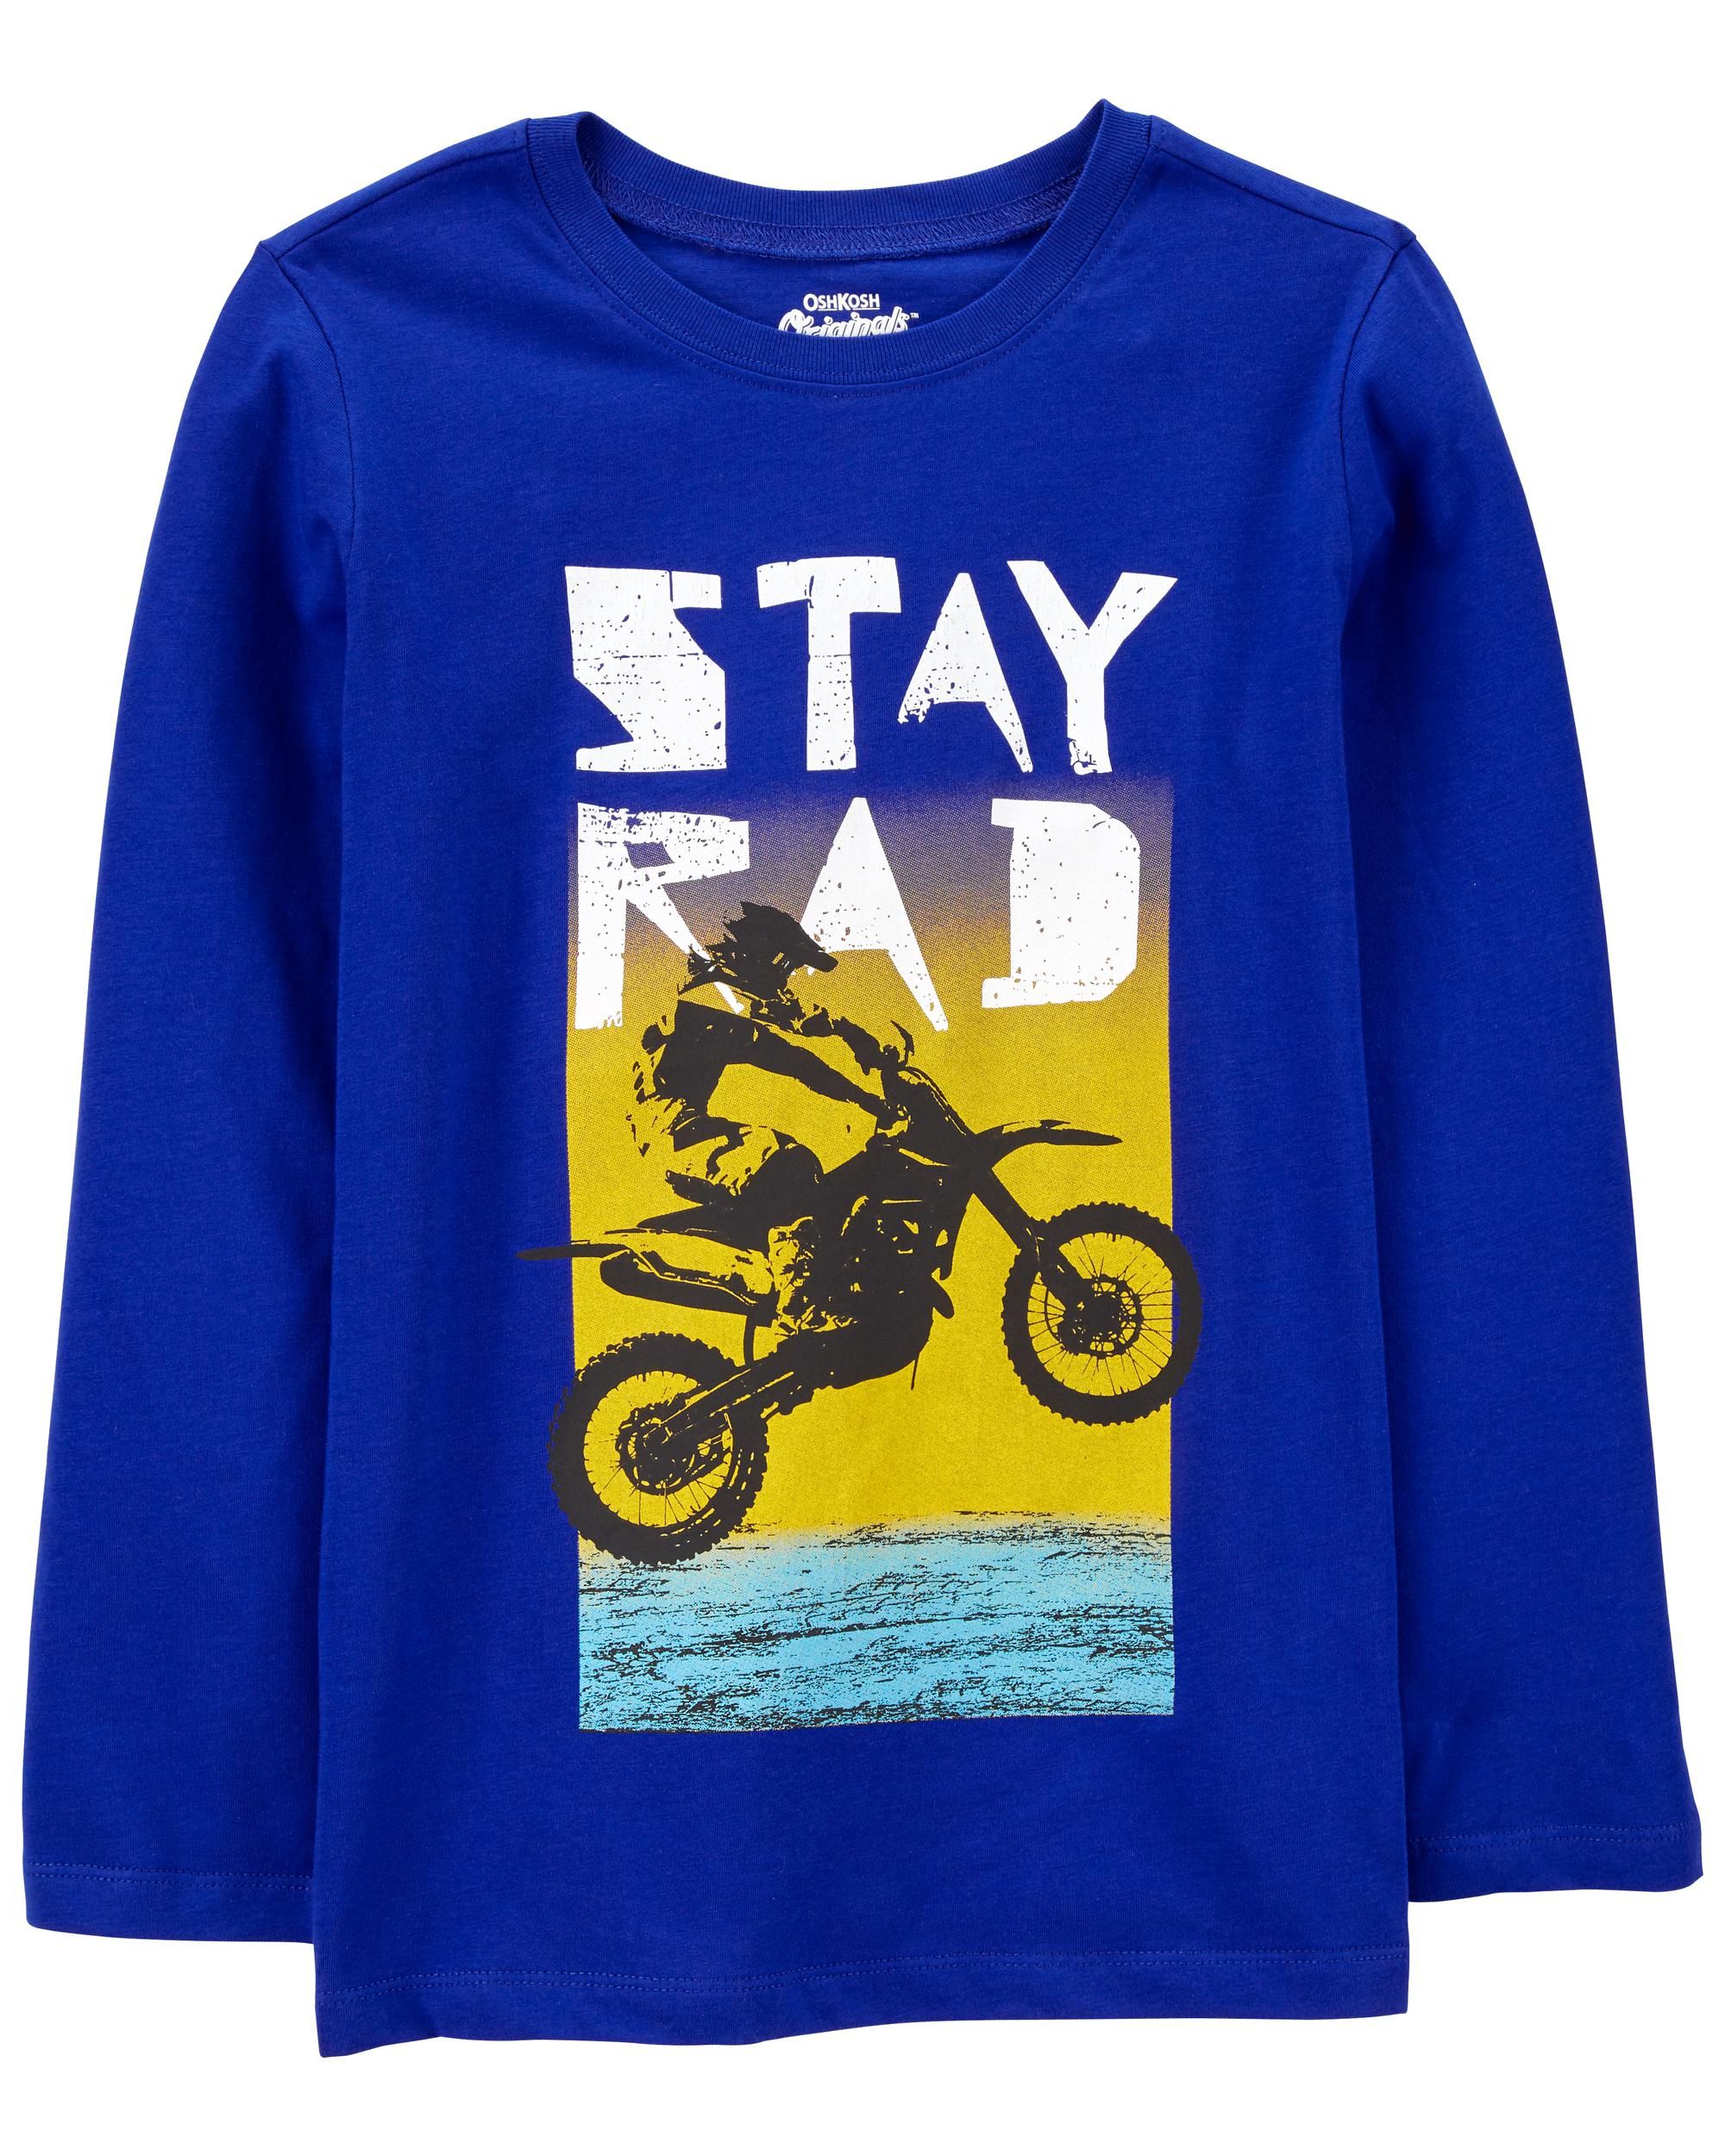 Stay Rad Jersey Tee | Carter's